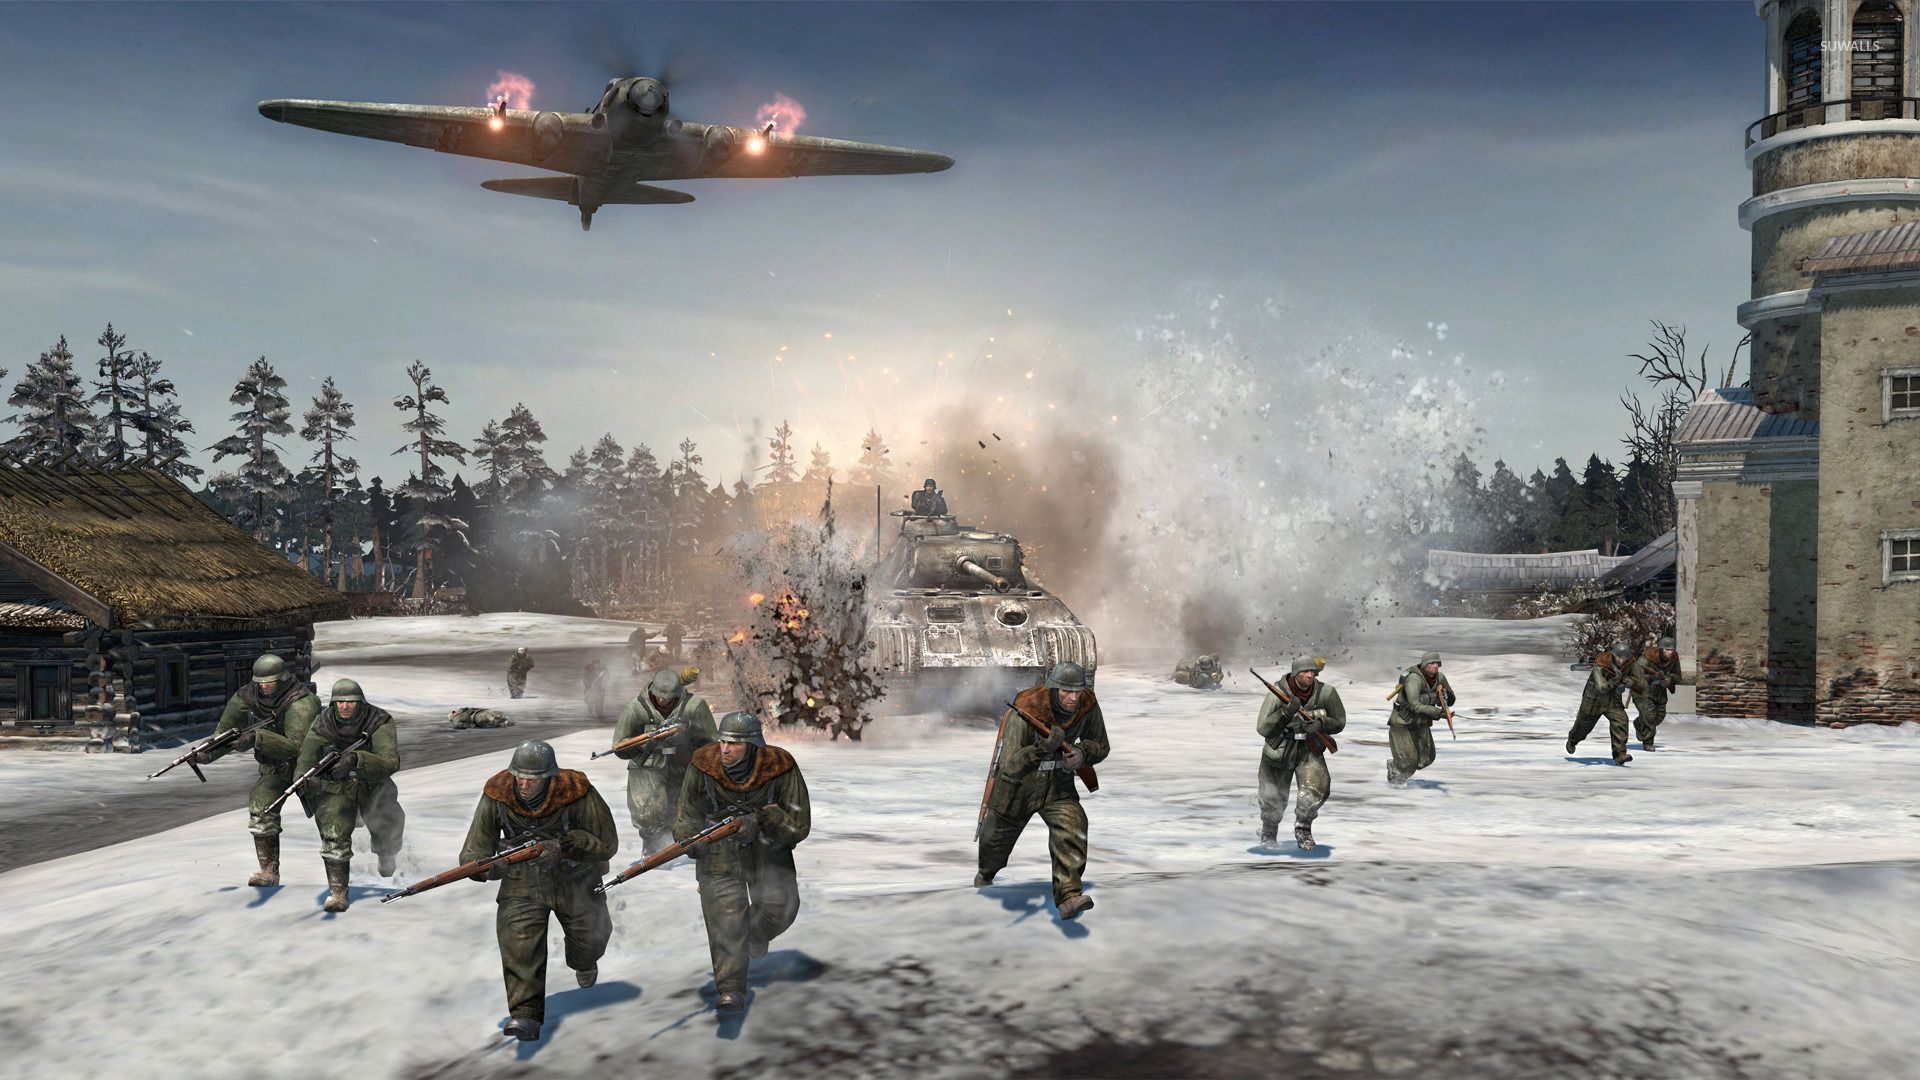 Heroes and Generals, Company of Heroes, Video Game Wallpapers, 1920x1080 Full HD Desktop